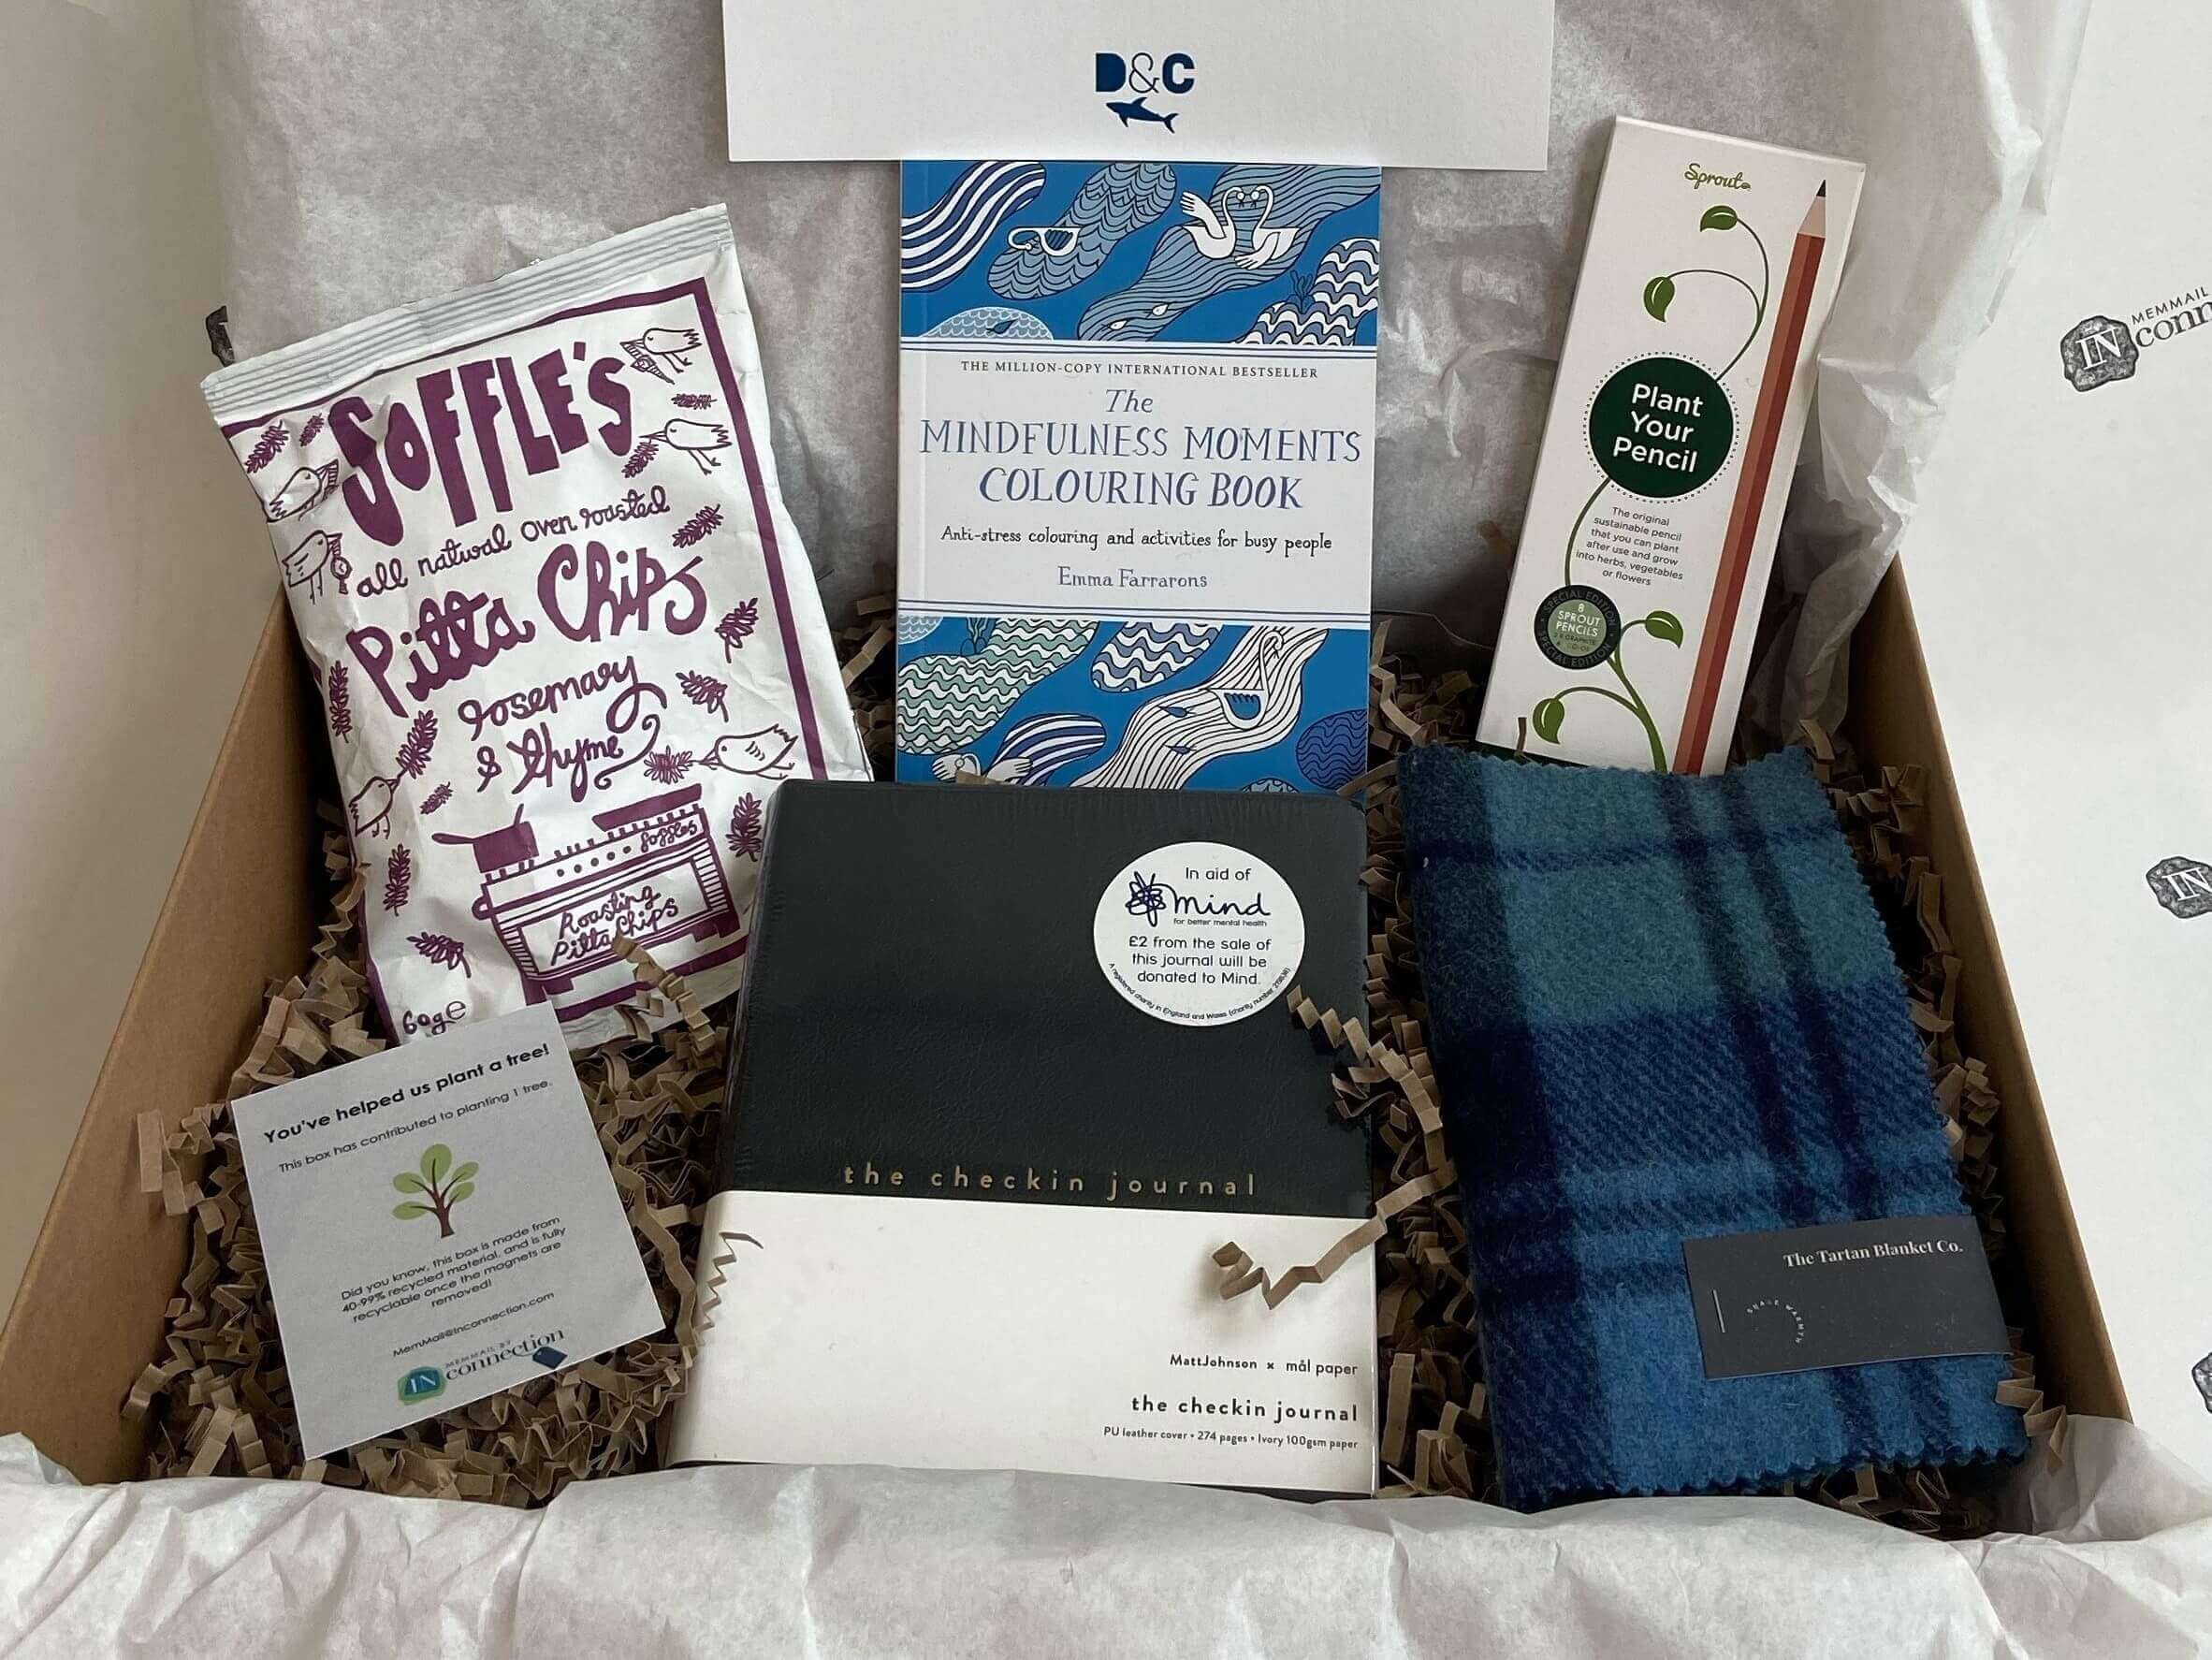 A gift hamper filled with ecofriendly products with a note that reads 'You've helped us plant a tree'